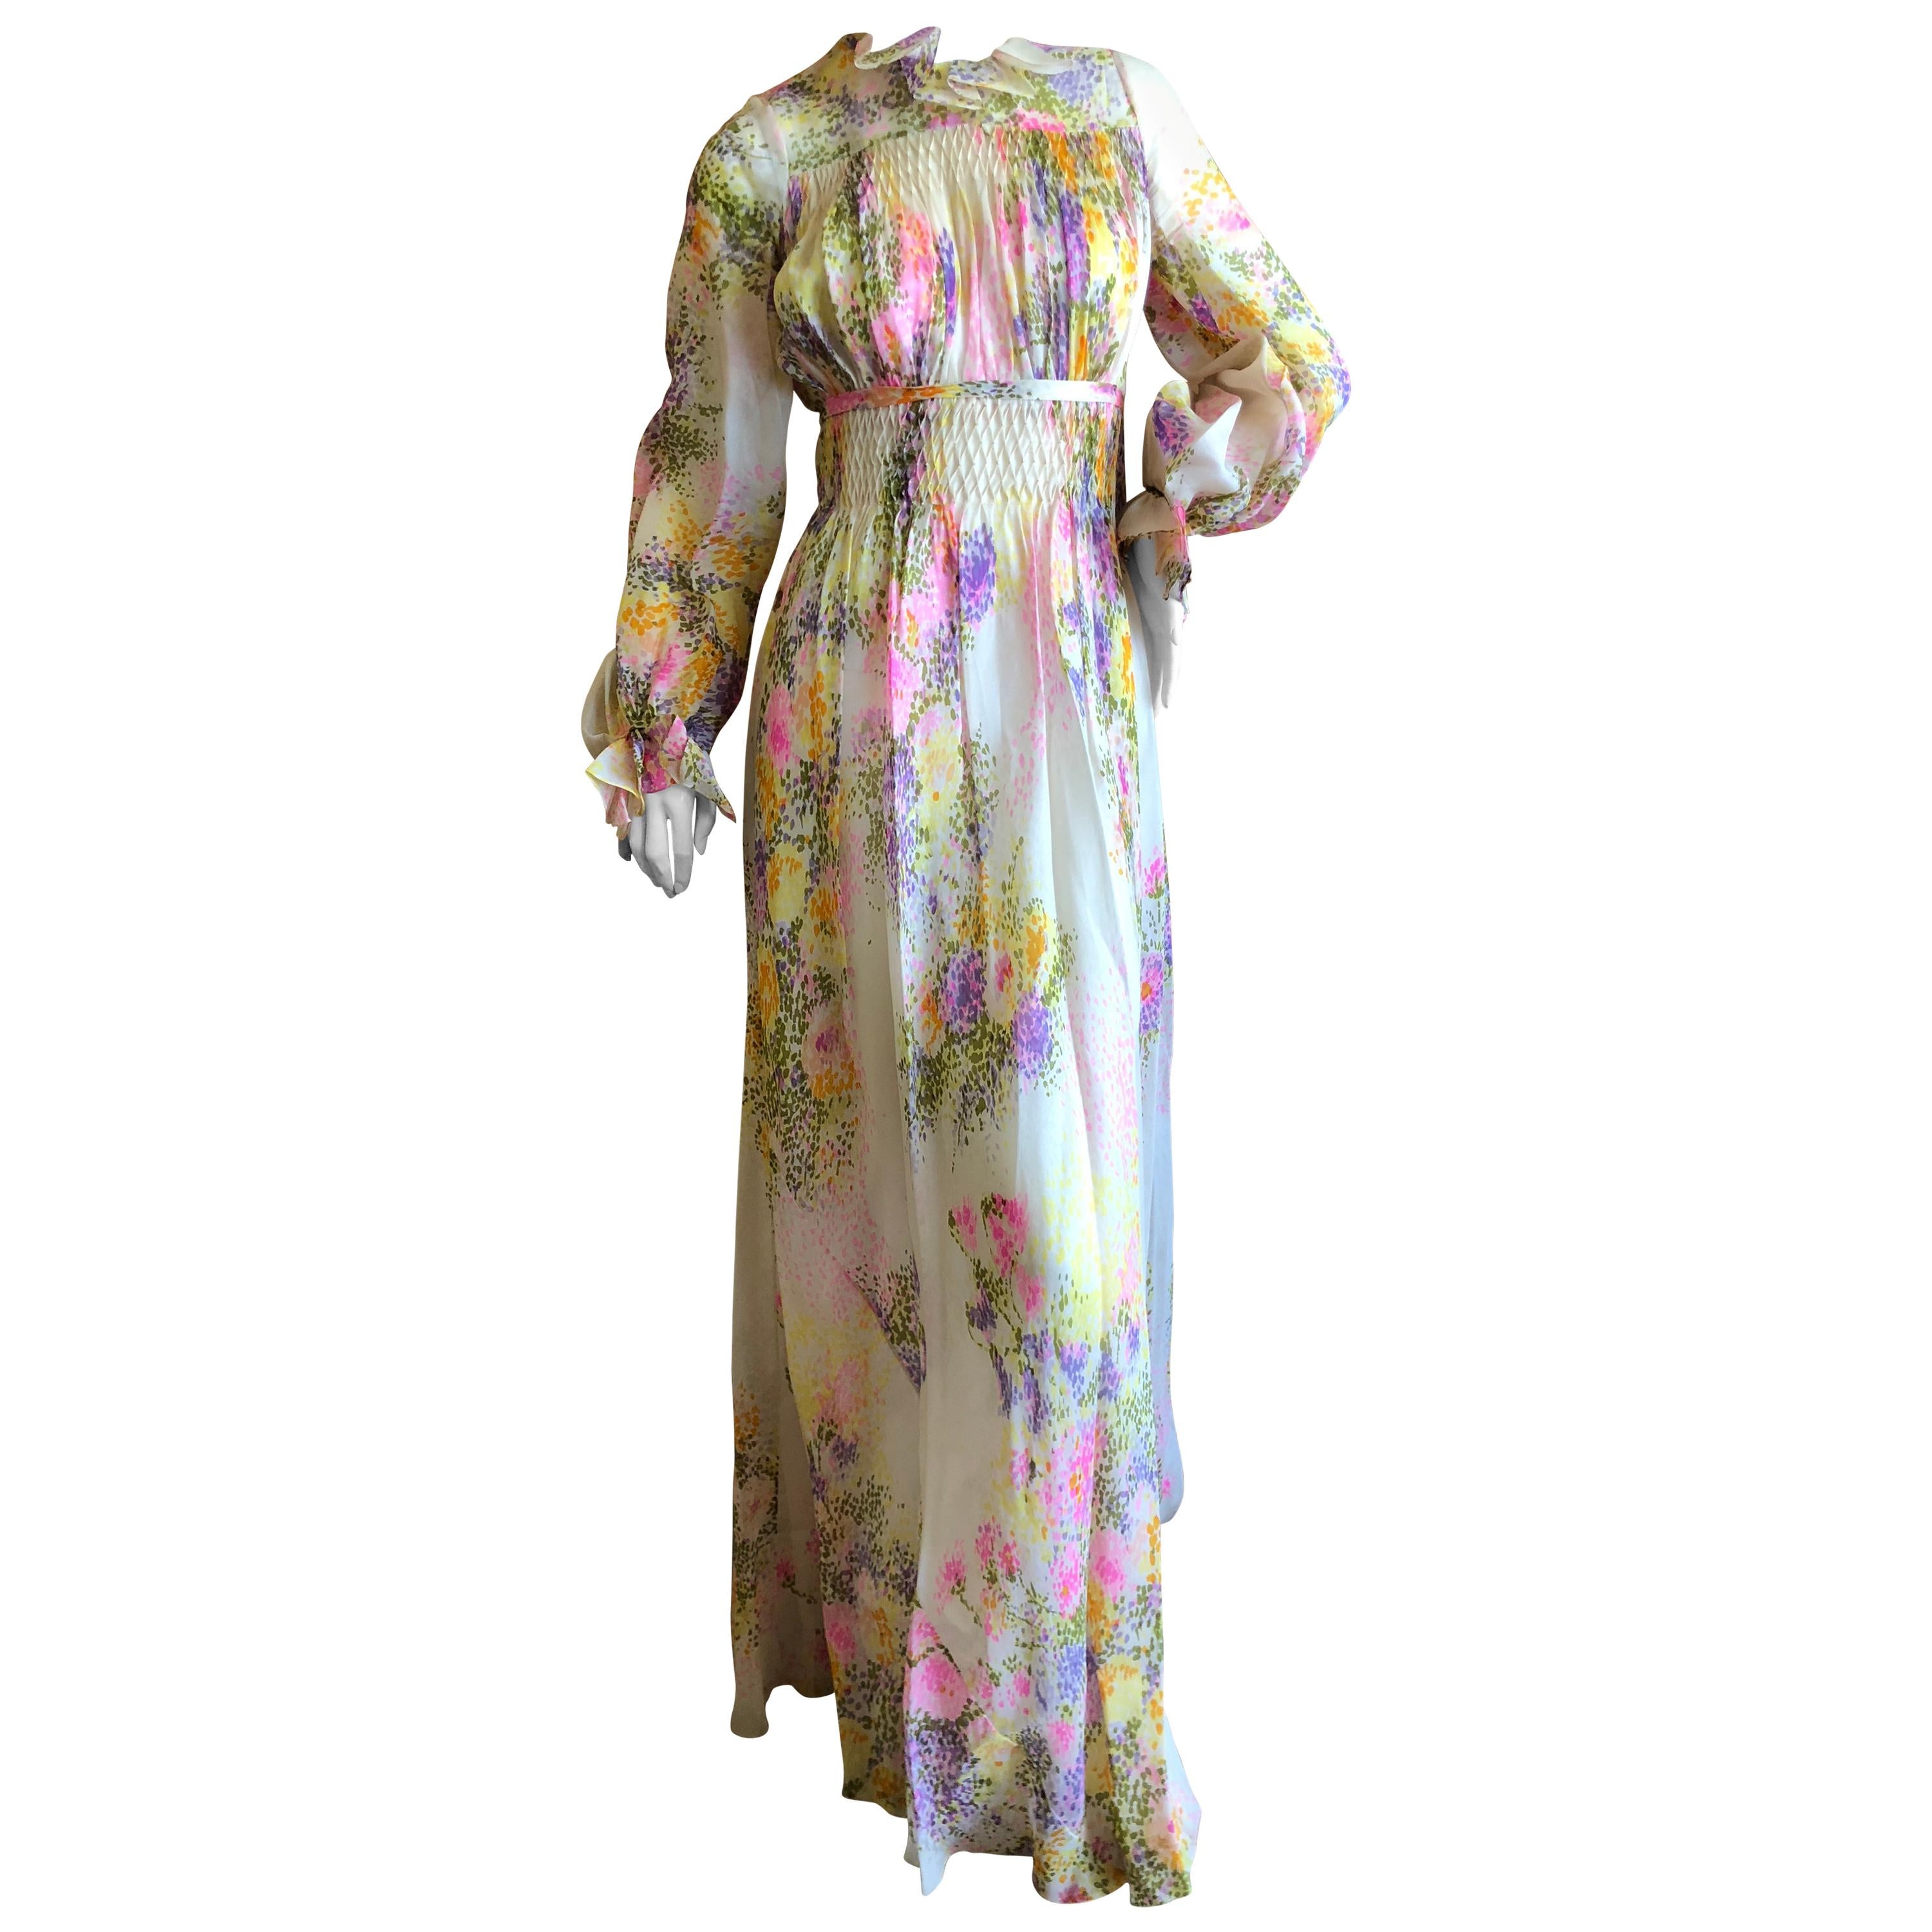 Cardinali Ruffle Silk Chiffon Floral Evening Dress with Pin Tuck Details, 1970s  For Sale